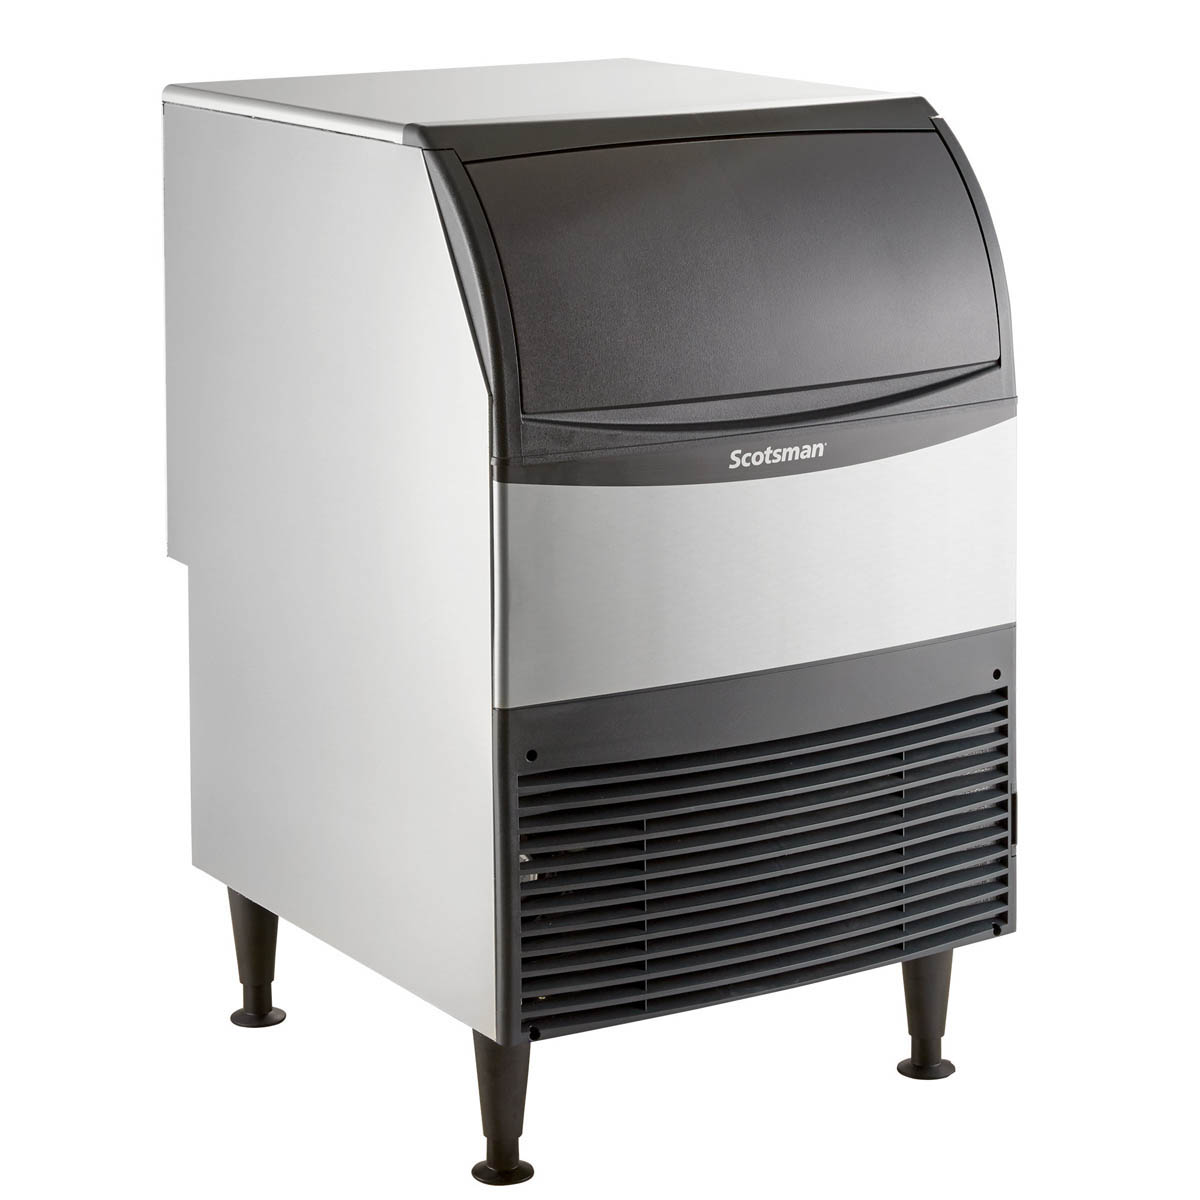 Scotsman UN324W-1 Provides Soft and Slow Melting For Your Service and Displays, Chef's Deal